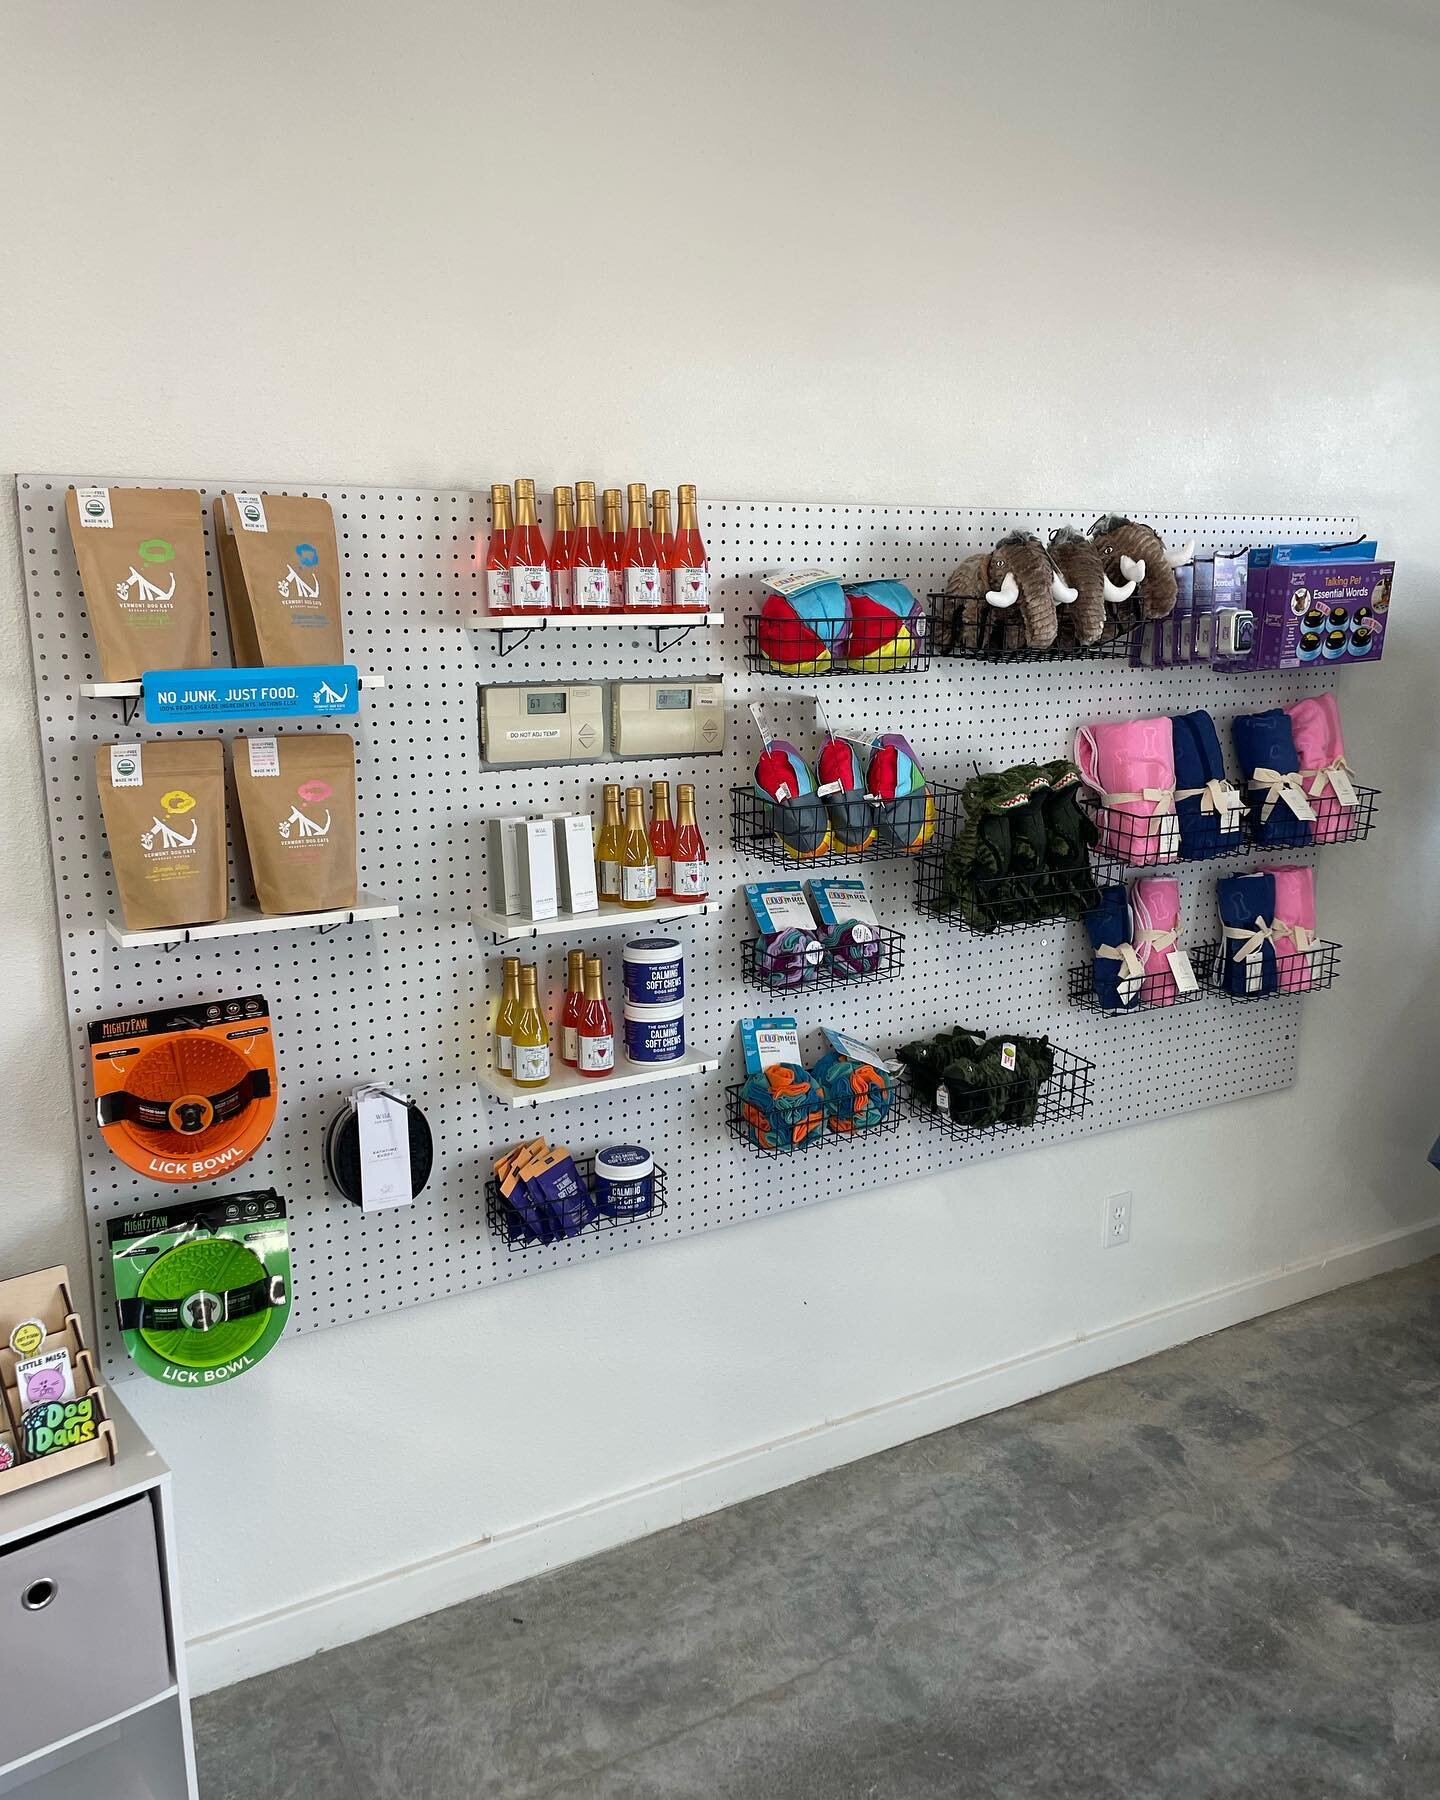 Have you seen our new addition yet?? 👀 Wishbone is now selling merch as well as some of our favorite, curated dog products that we think you and your pup will love! Stop and in spoil your pup with daycare or a goody from our little retail corner! 🤩